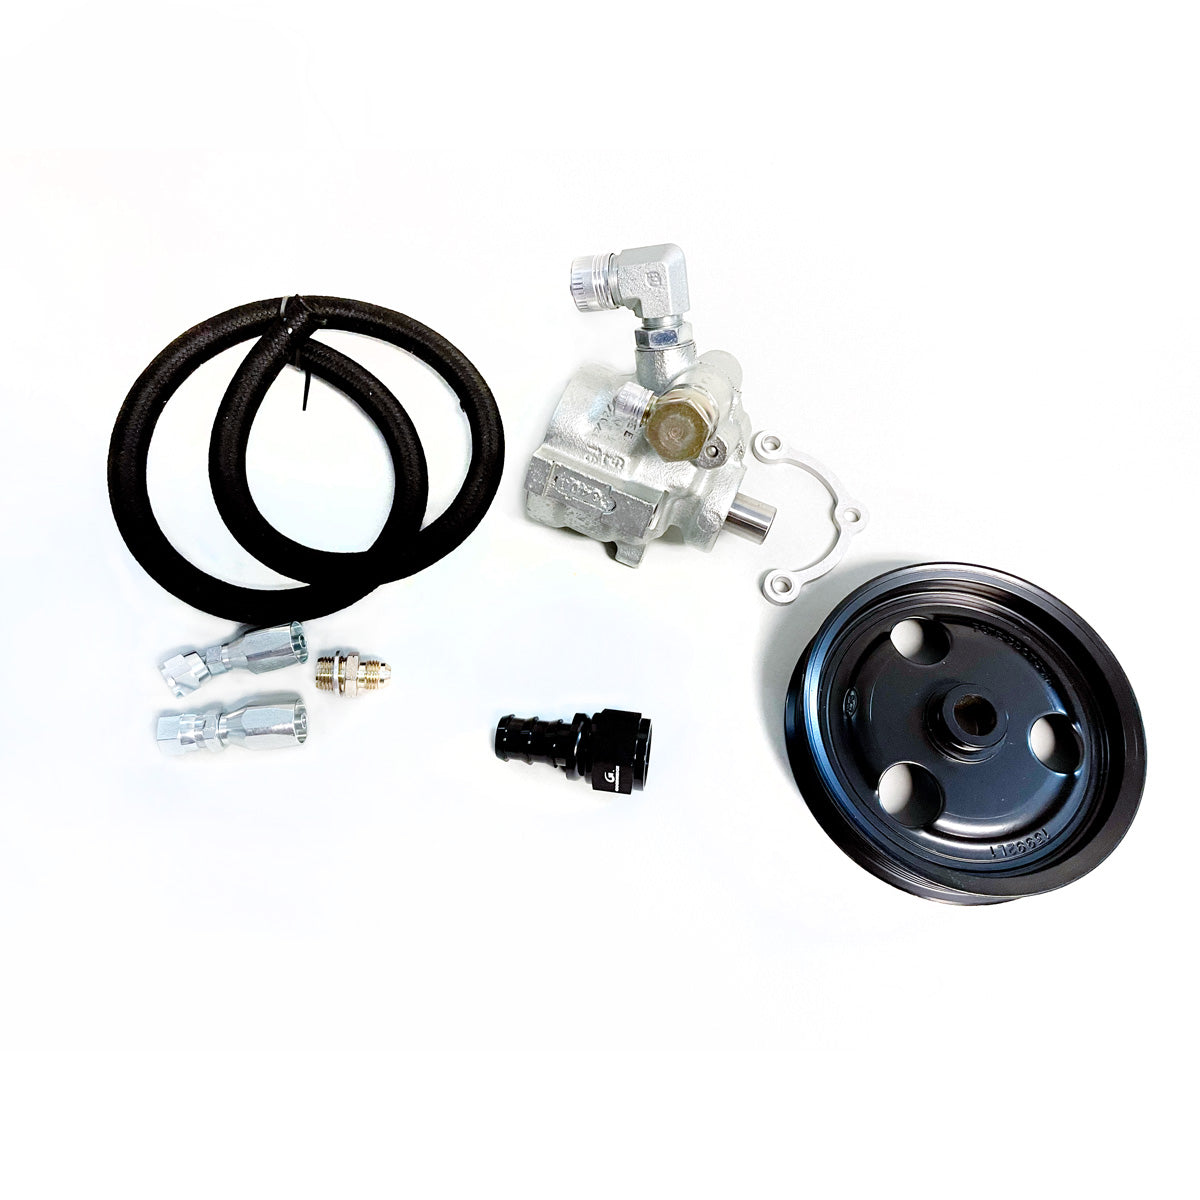 Saginaw Power Steering Pump Upgrade Kit For 2008-2010 Ford F250/350 6.4L